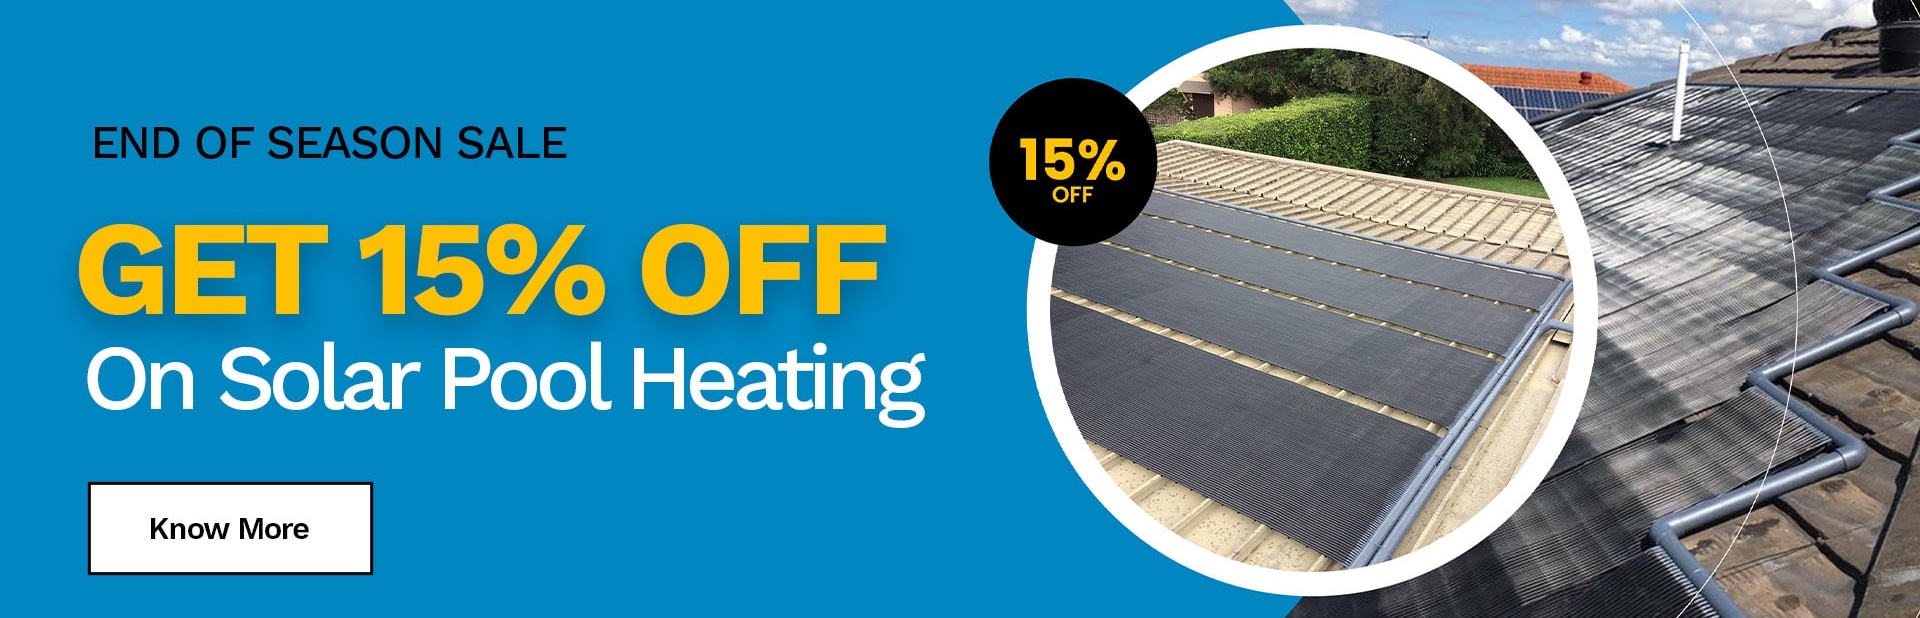 get offer for solar pool heating systems